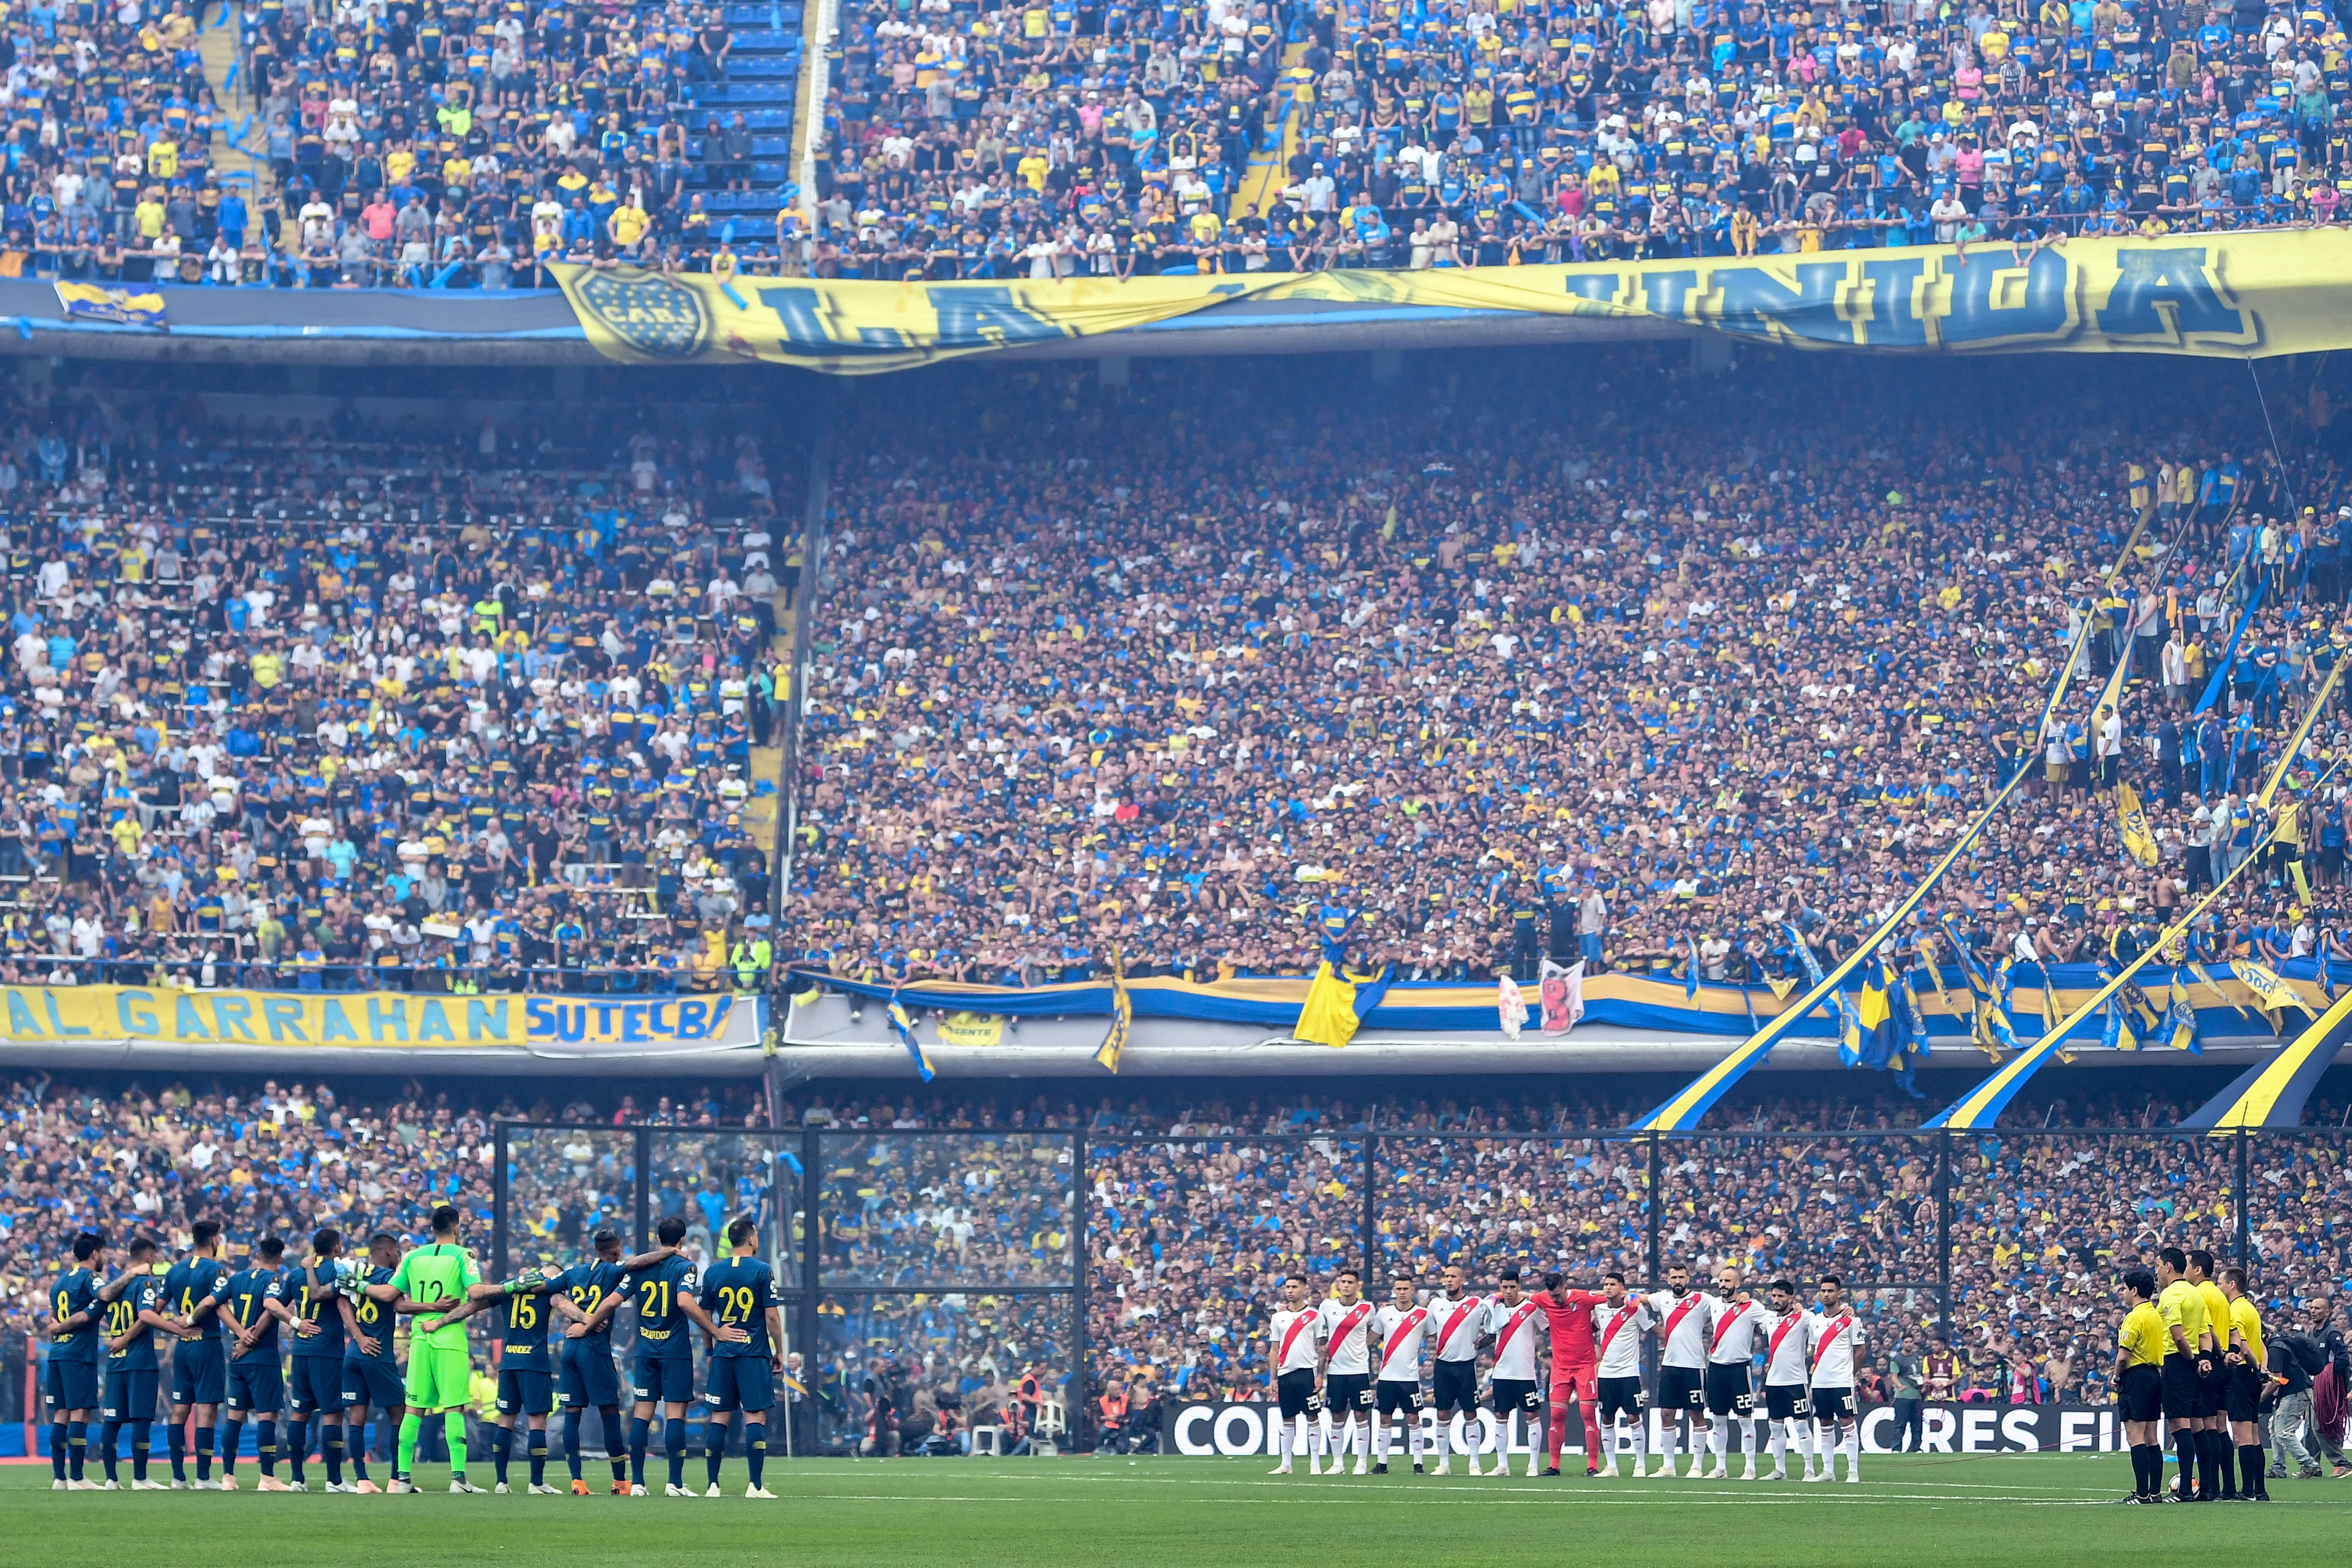 Superclasico: Boca Juniors Vs River Plate - A fierce rivalry that divides  the city of Buenos Aires